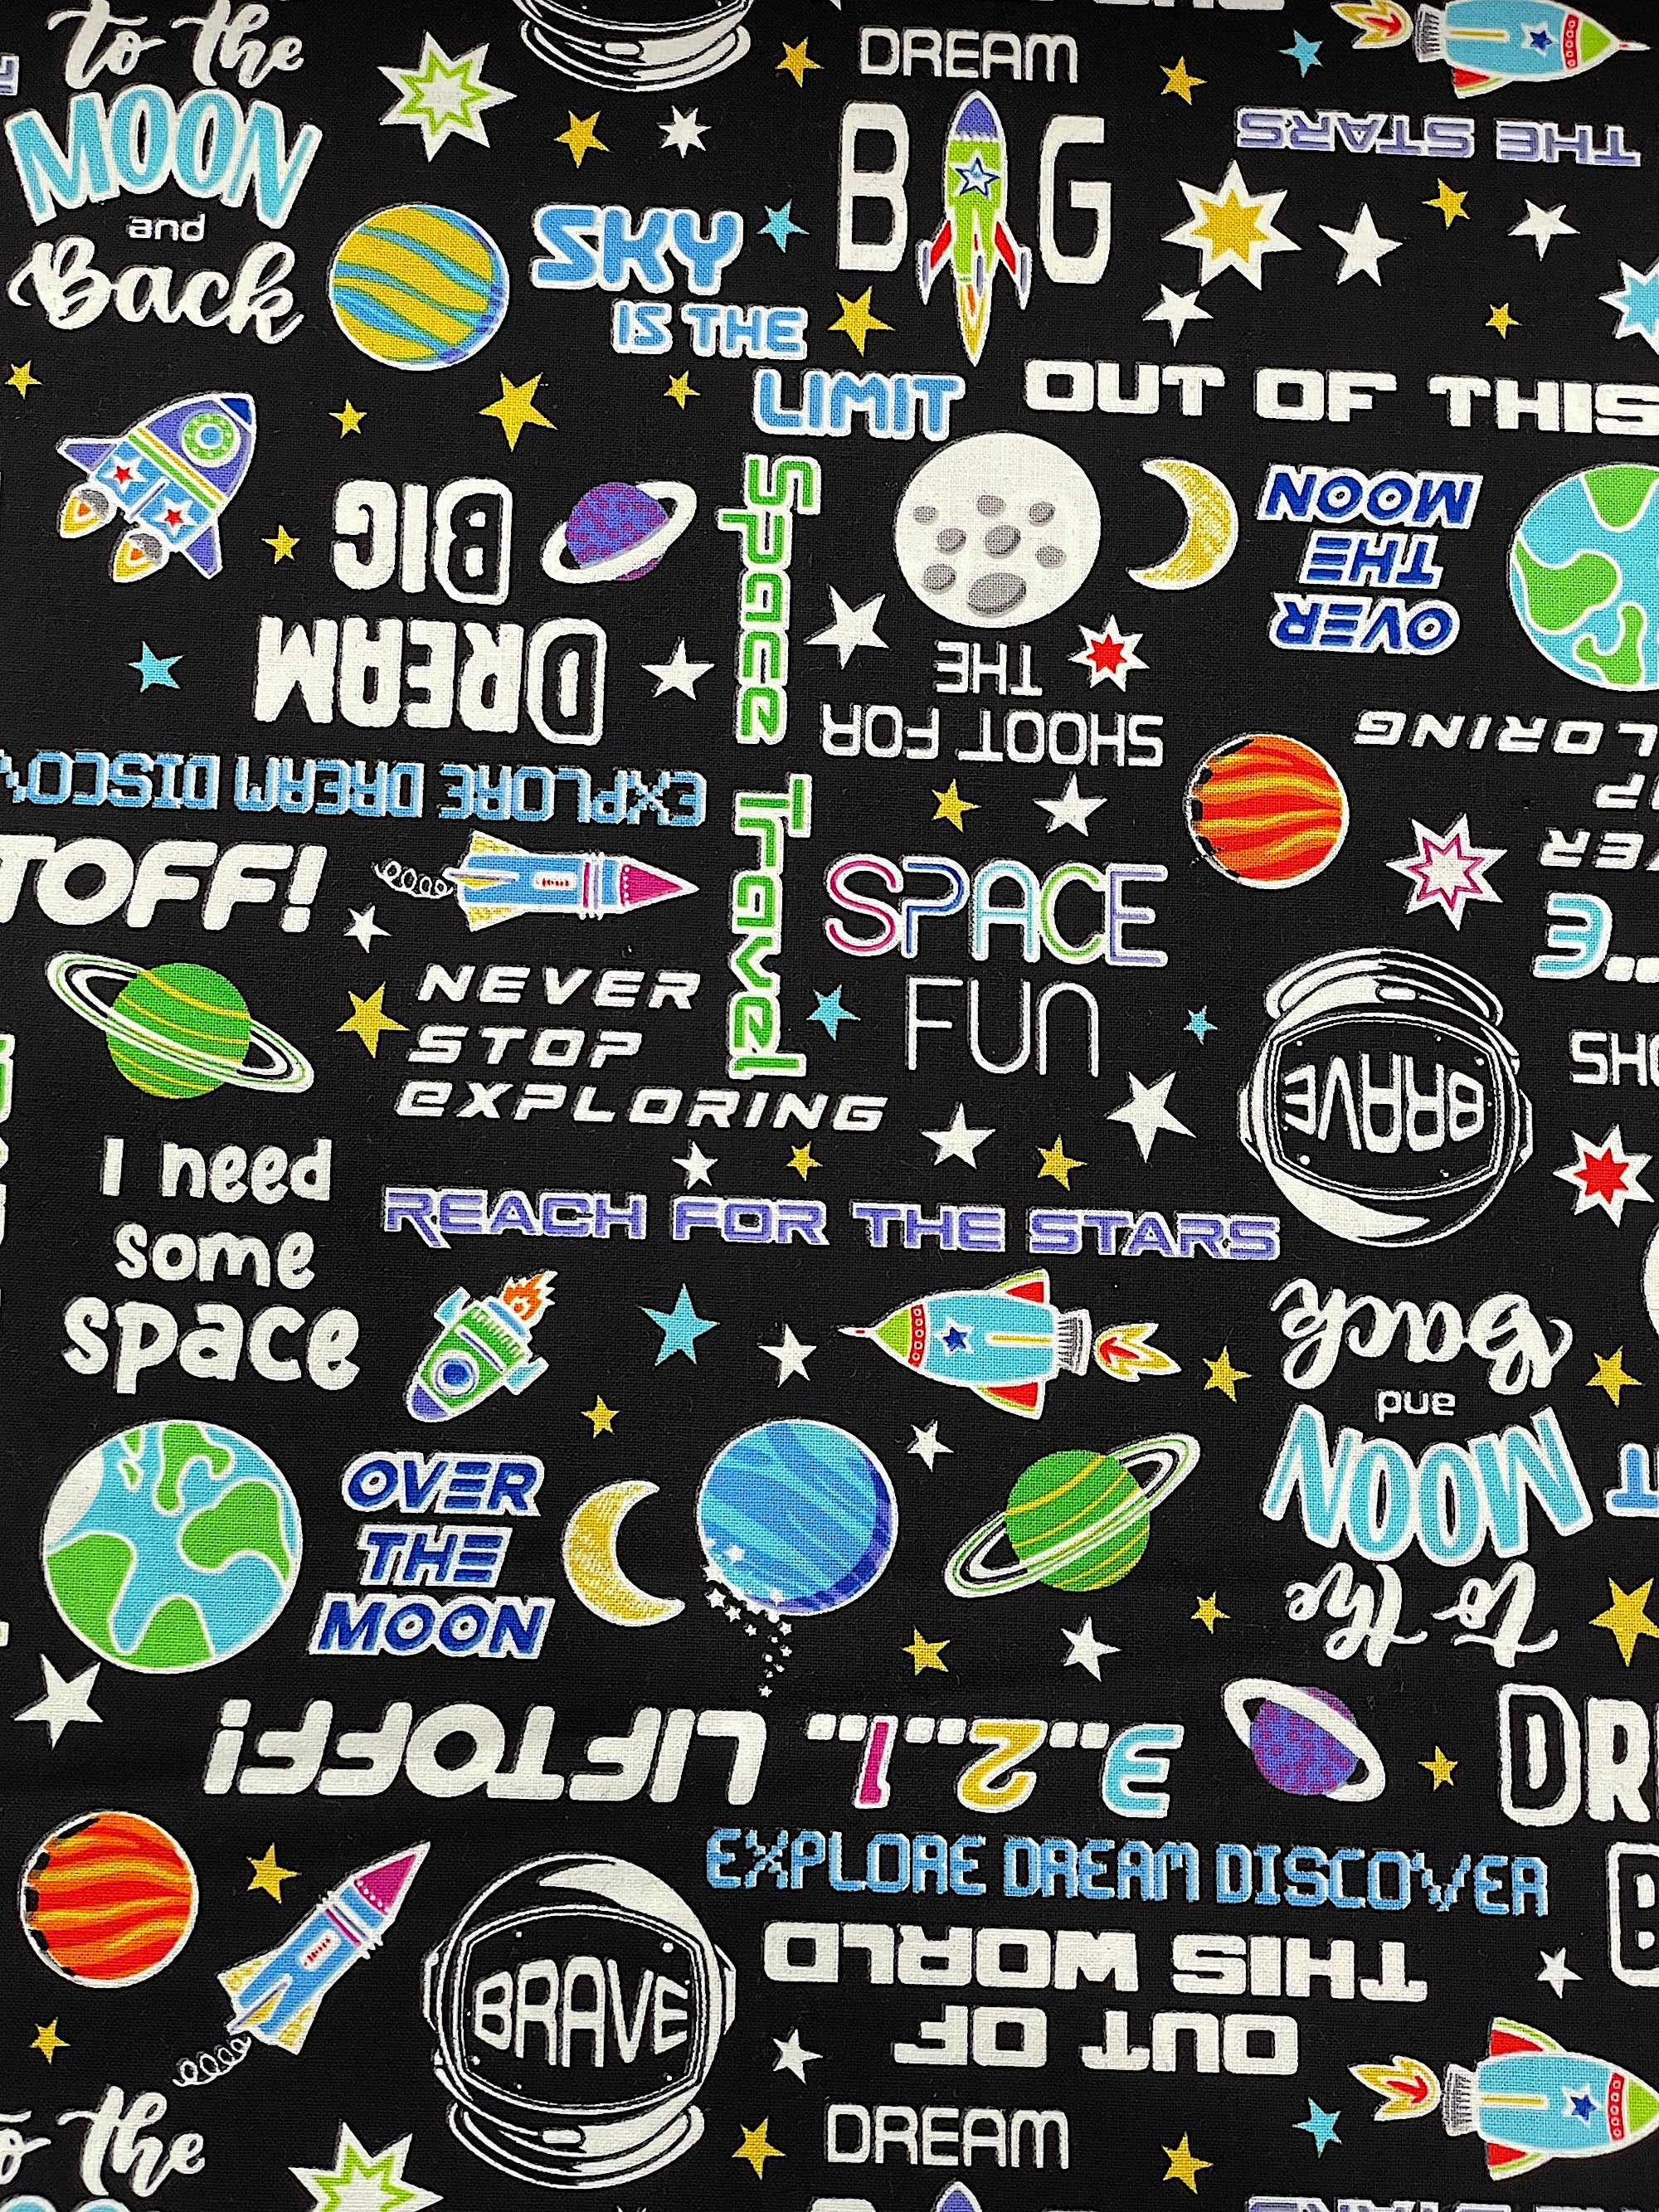 This fabric is part of the Lift Off collection by Kanvas Studio. This black fabric is covered with moons, and sayings such as to the moon and back, out of this world, dream big, lift off, sky is the limit and more.